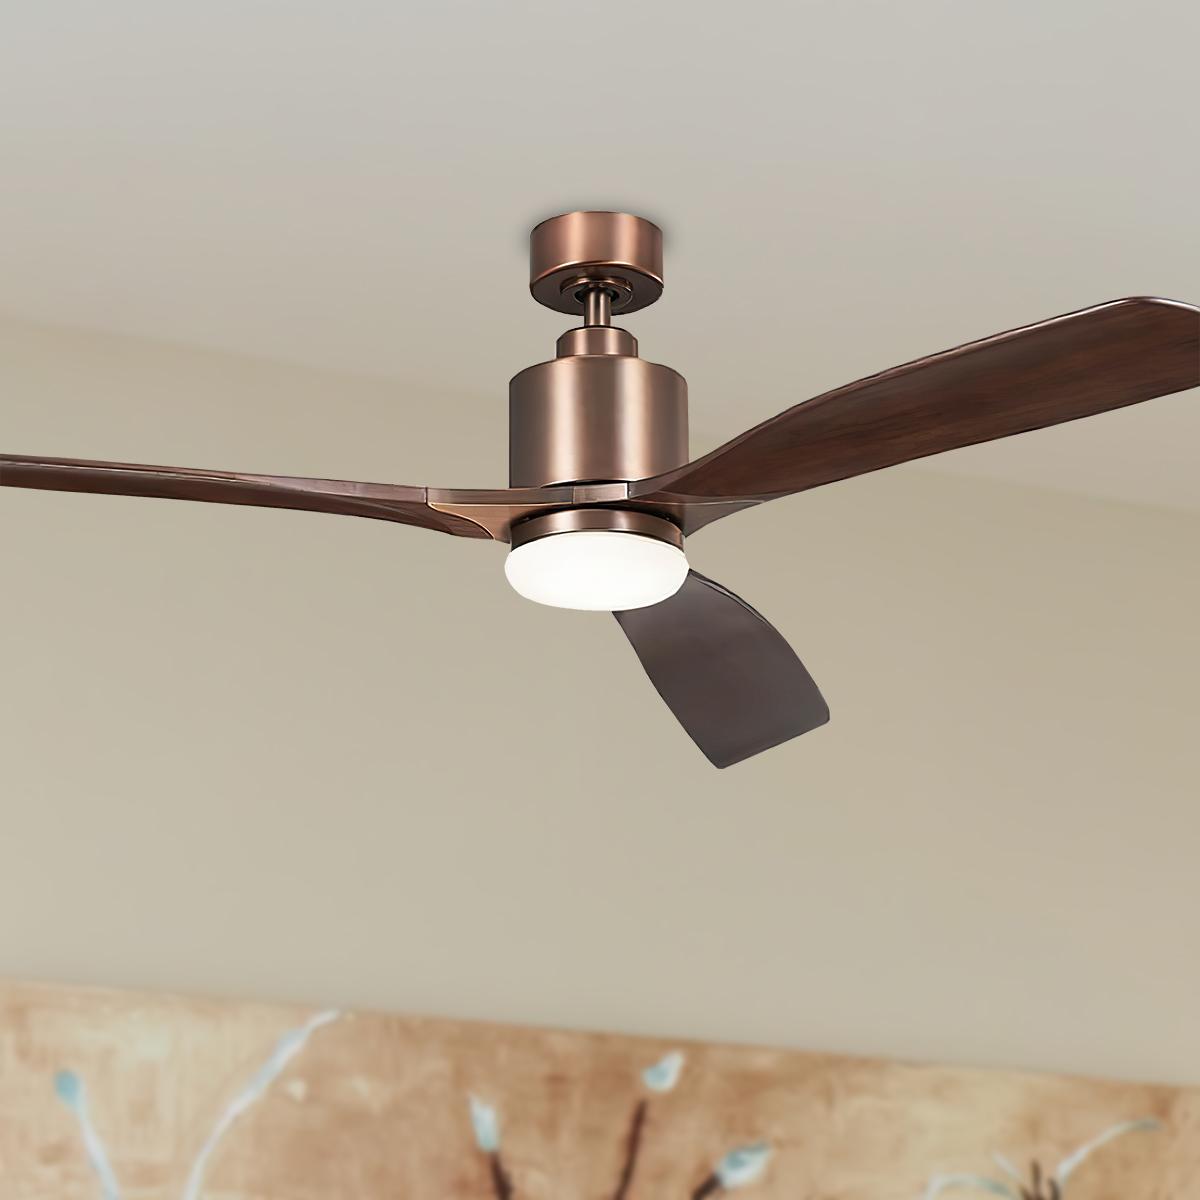 Ridley Ii 60 Inch Propeller Ceiling Fan With Light, Wall Control Included - Bees Lighting